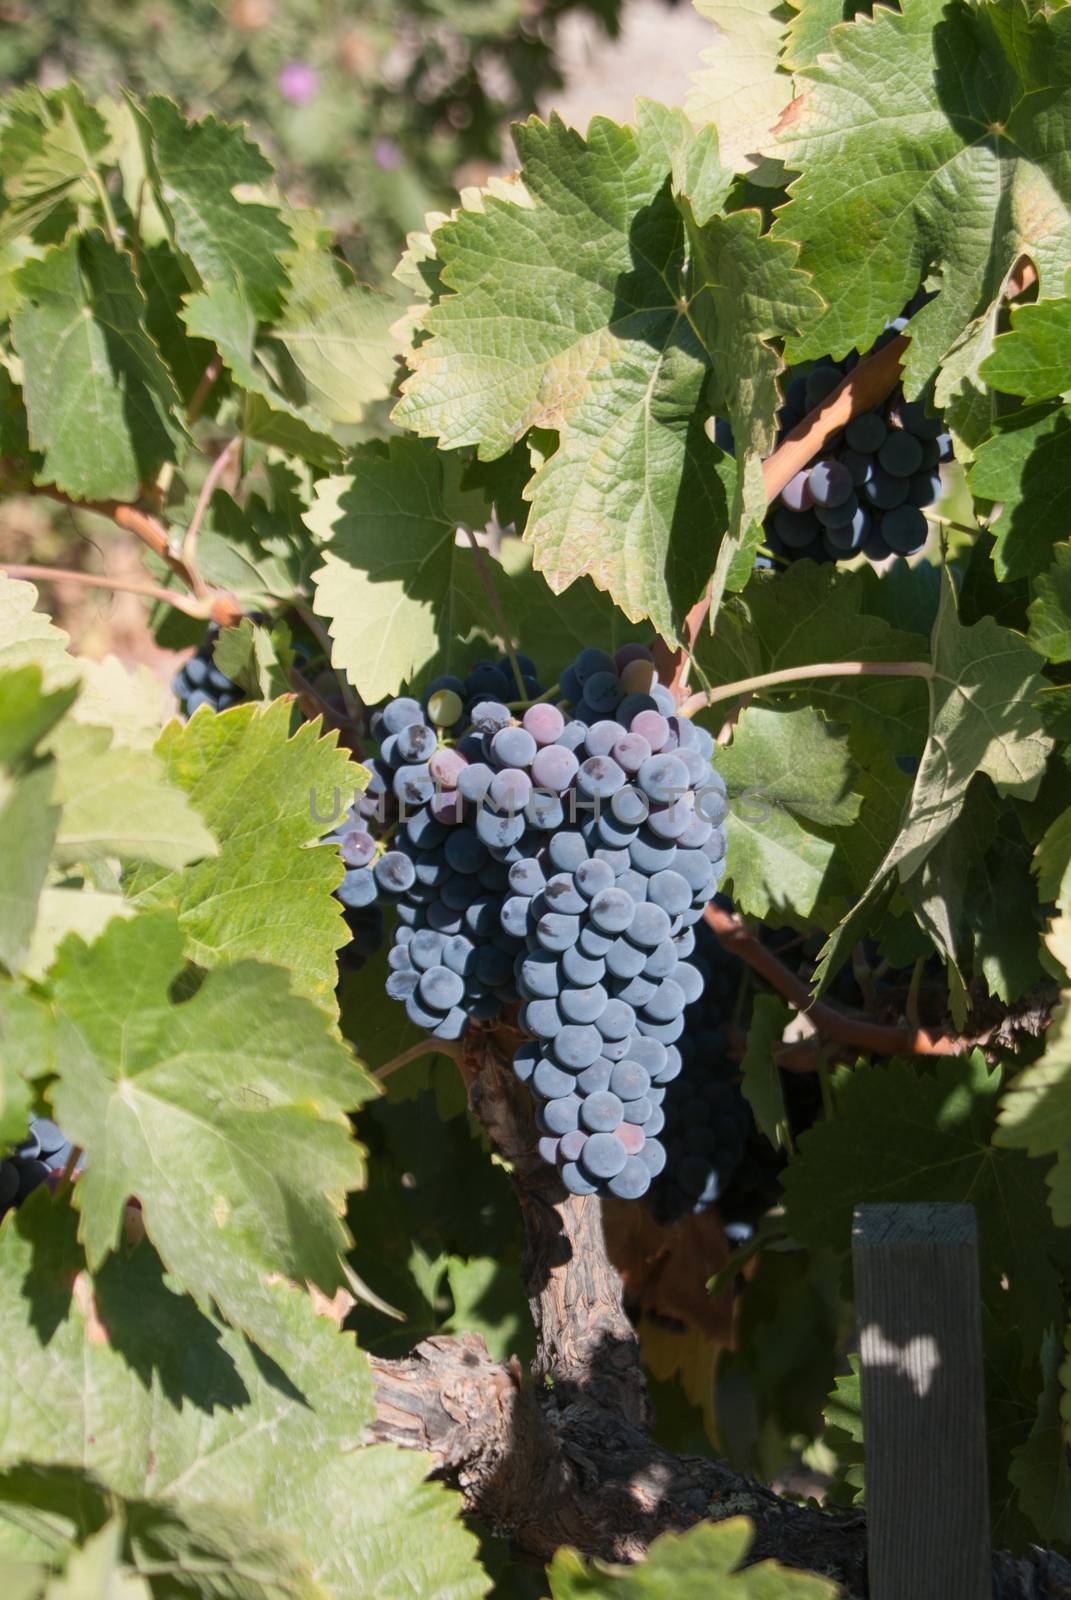 California grapes are ready for picking